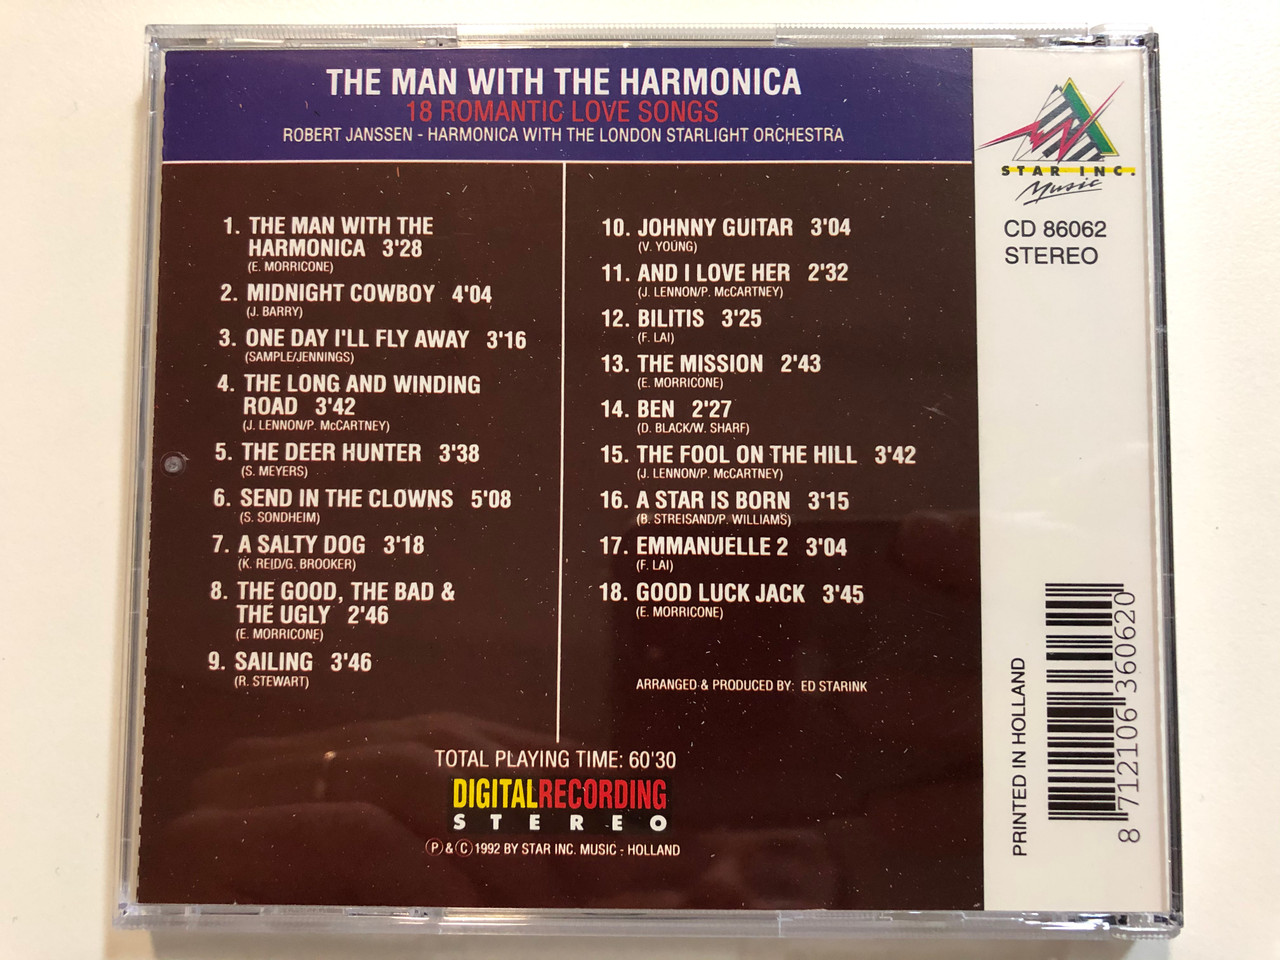 The Man With The Harmonica - 18 Romantic Love Songs / Robert Janssen With  The London Starlight Orchestra / Midnight Cowboy, Sailing, The Long And  Winding Road, The Deer Hunter / Star